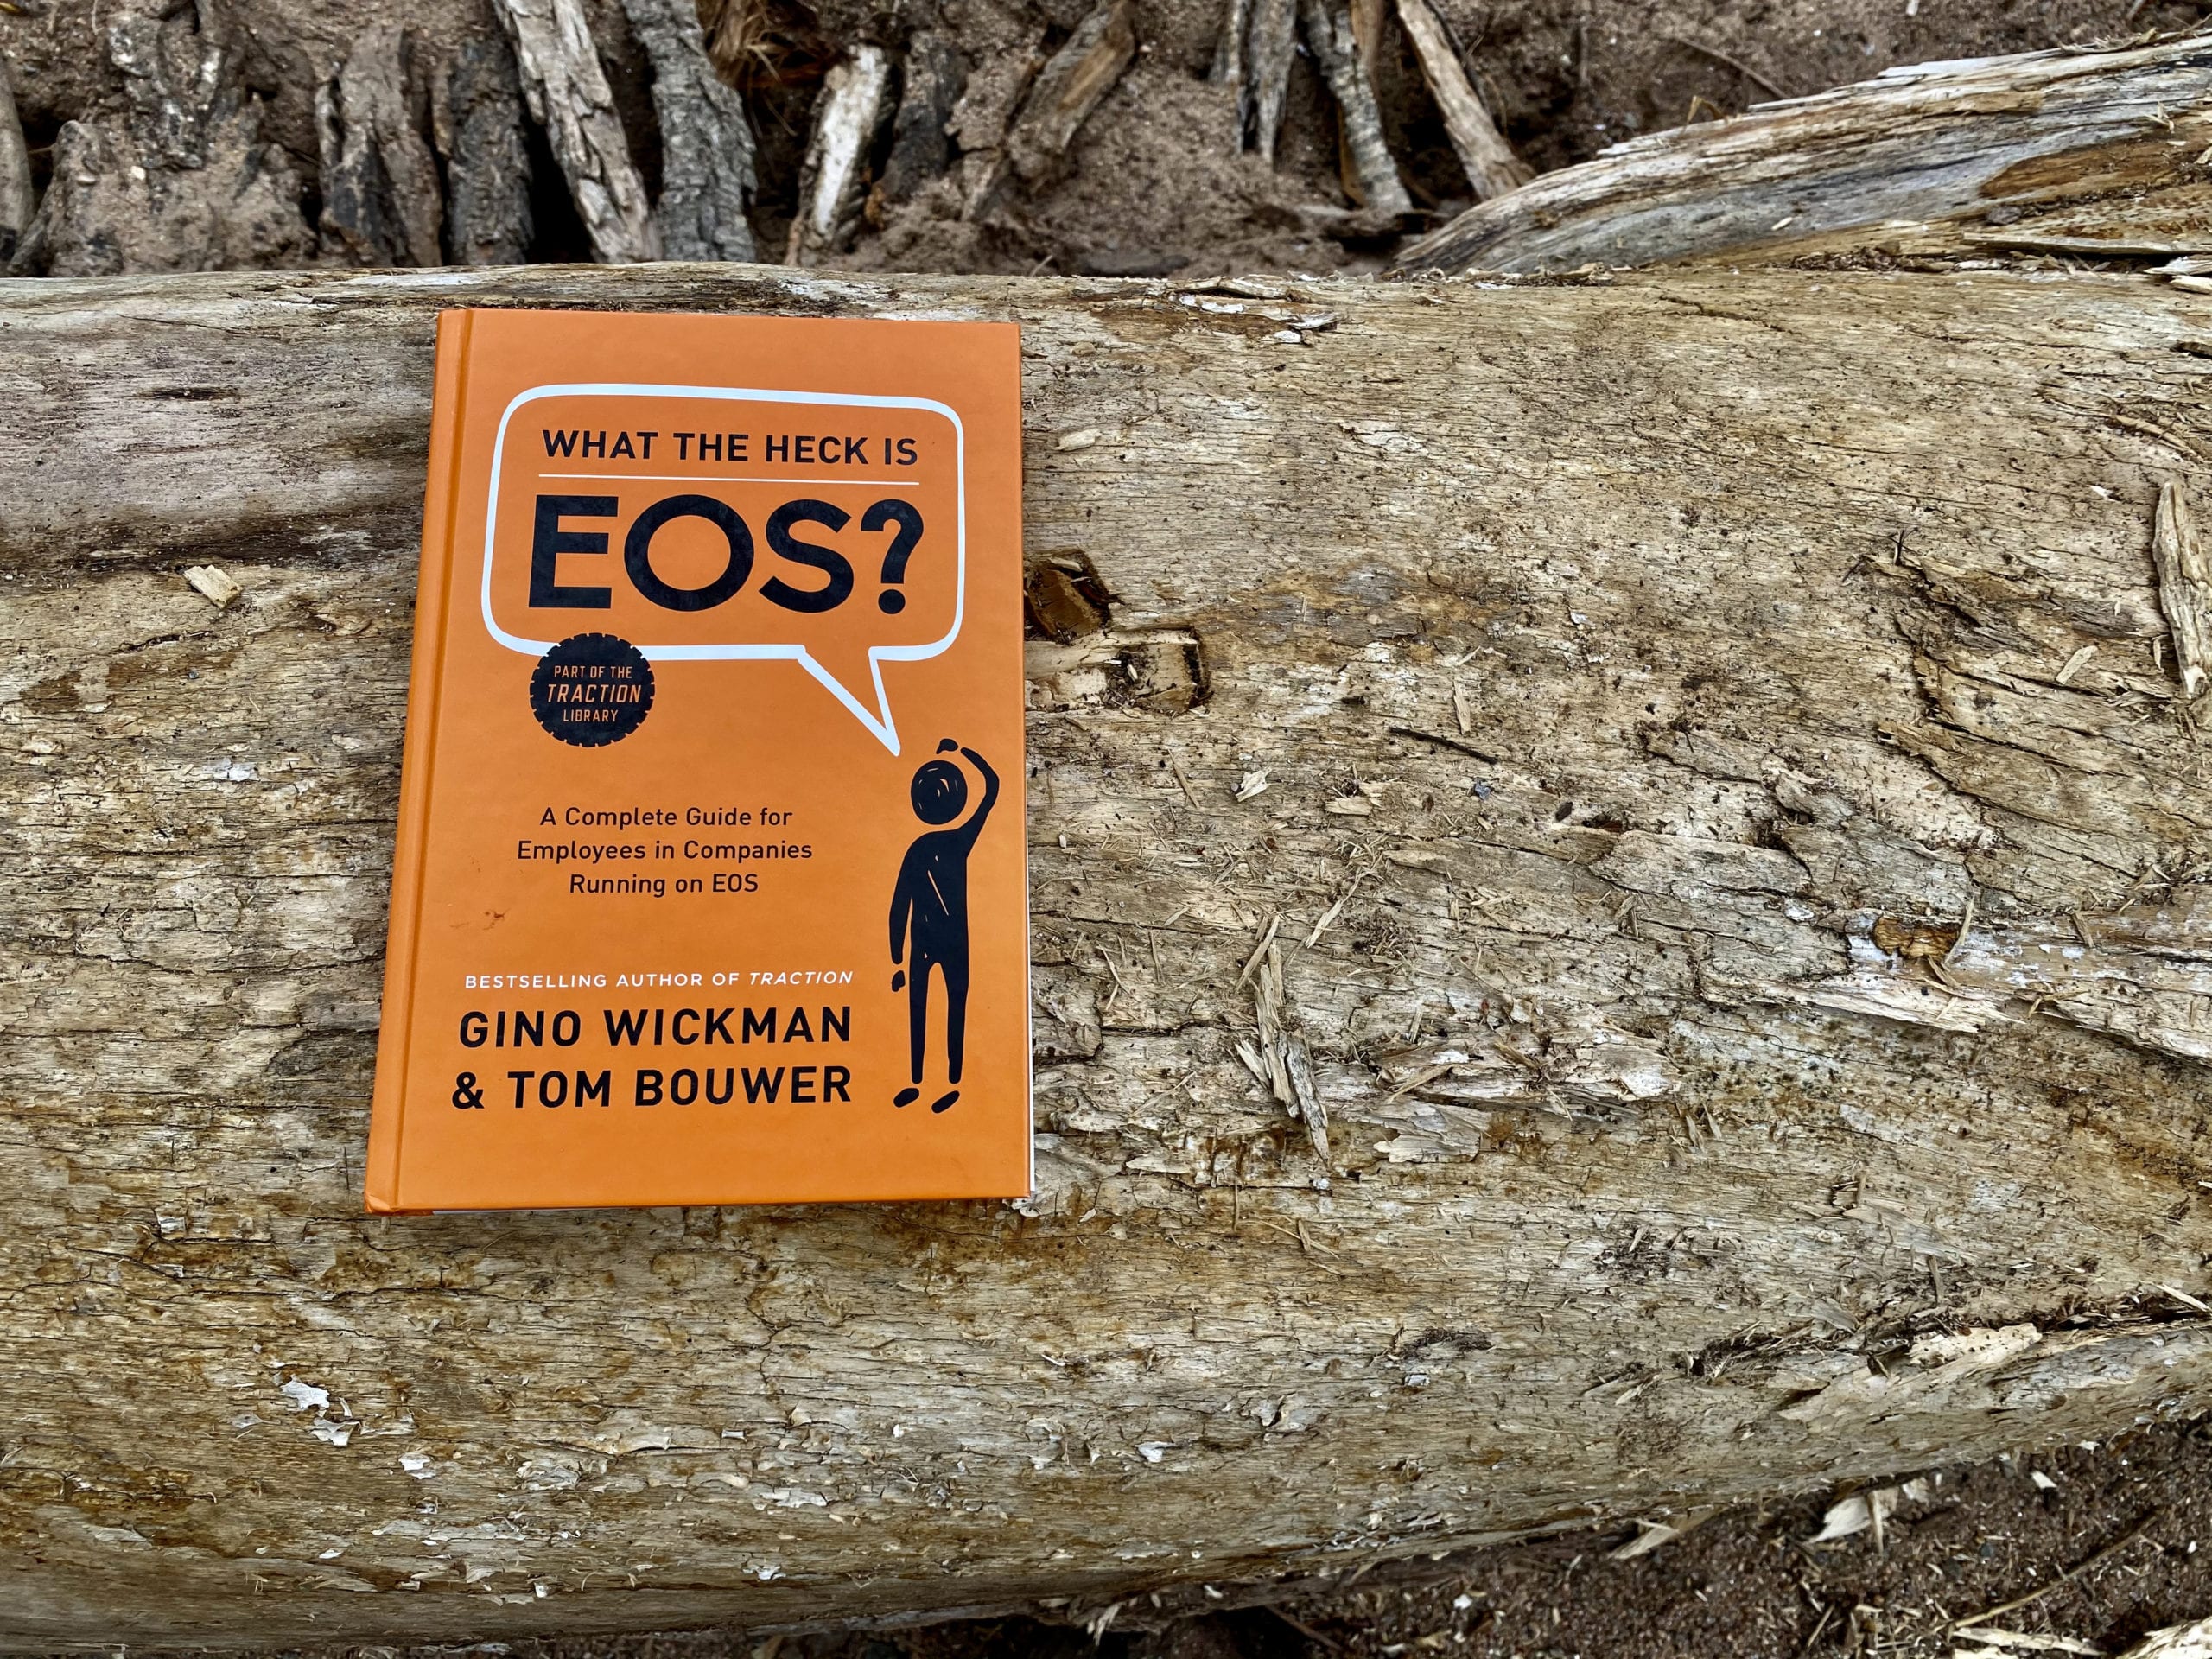 What The Heck Is EOS - Book Photo on Log